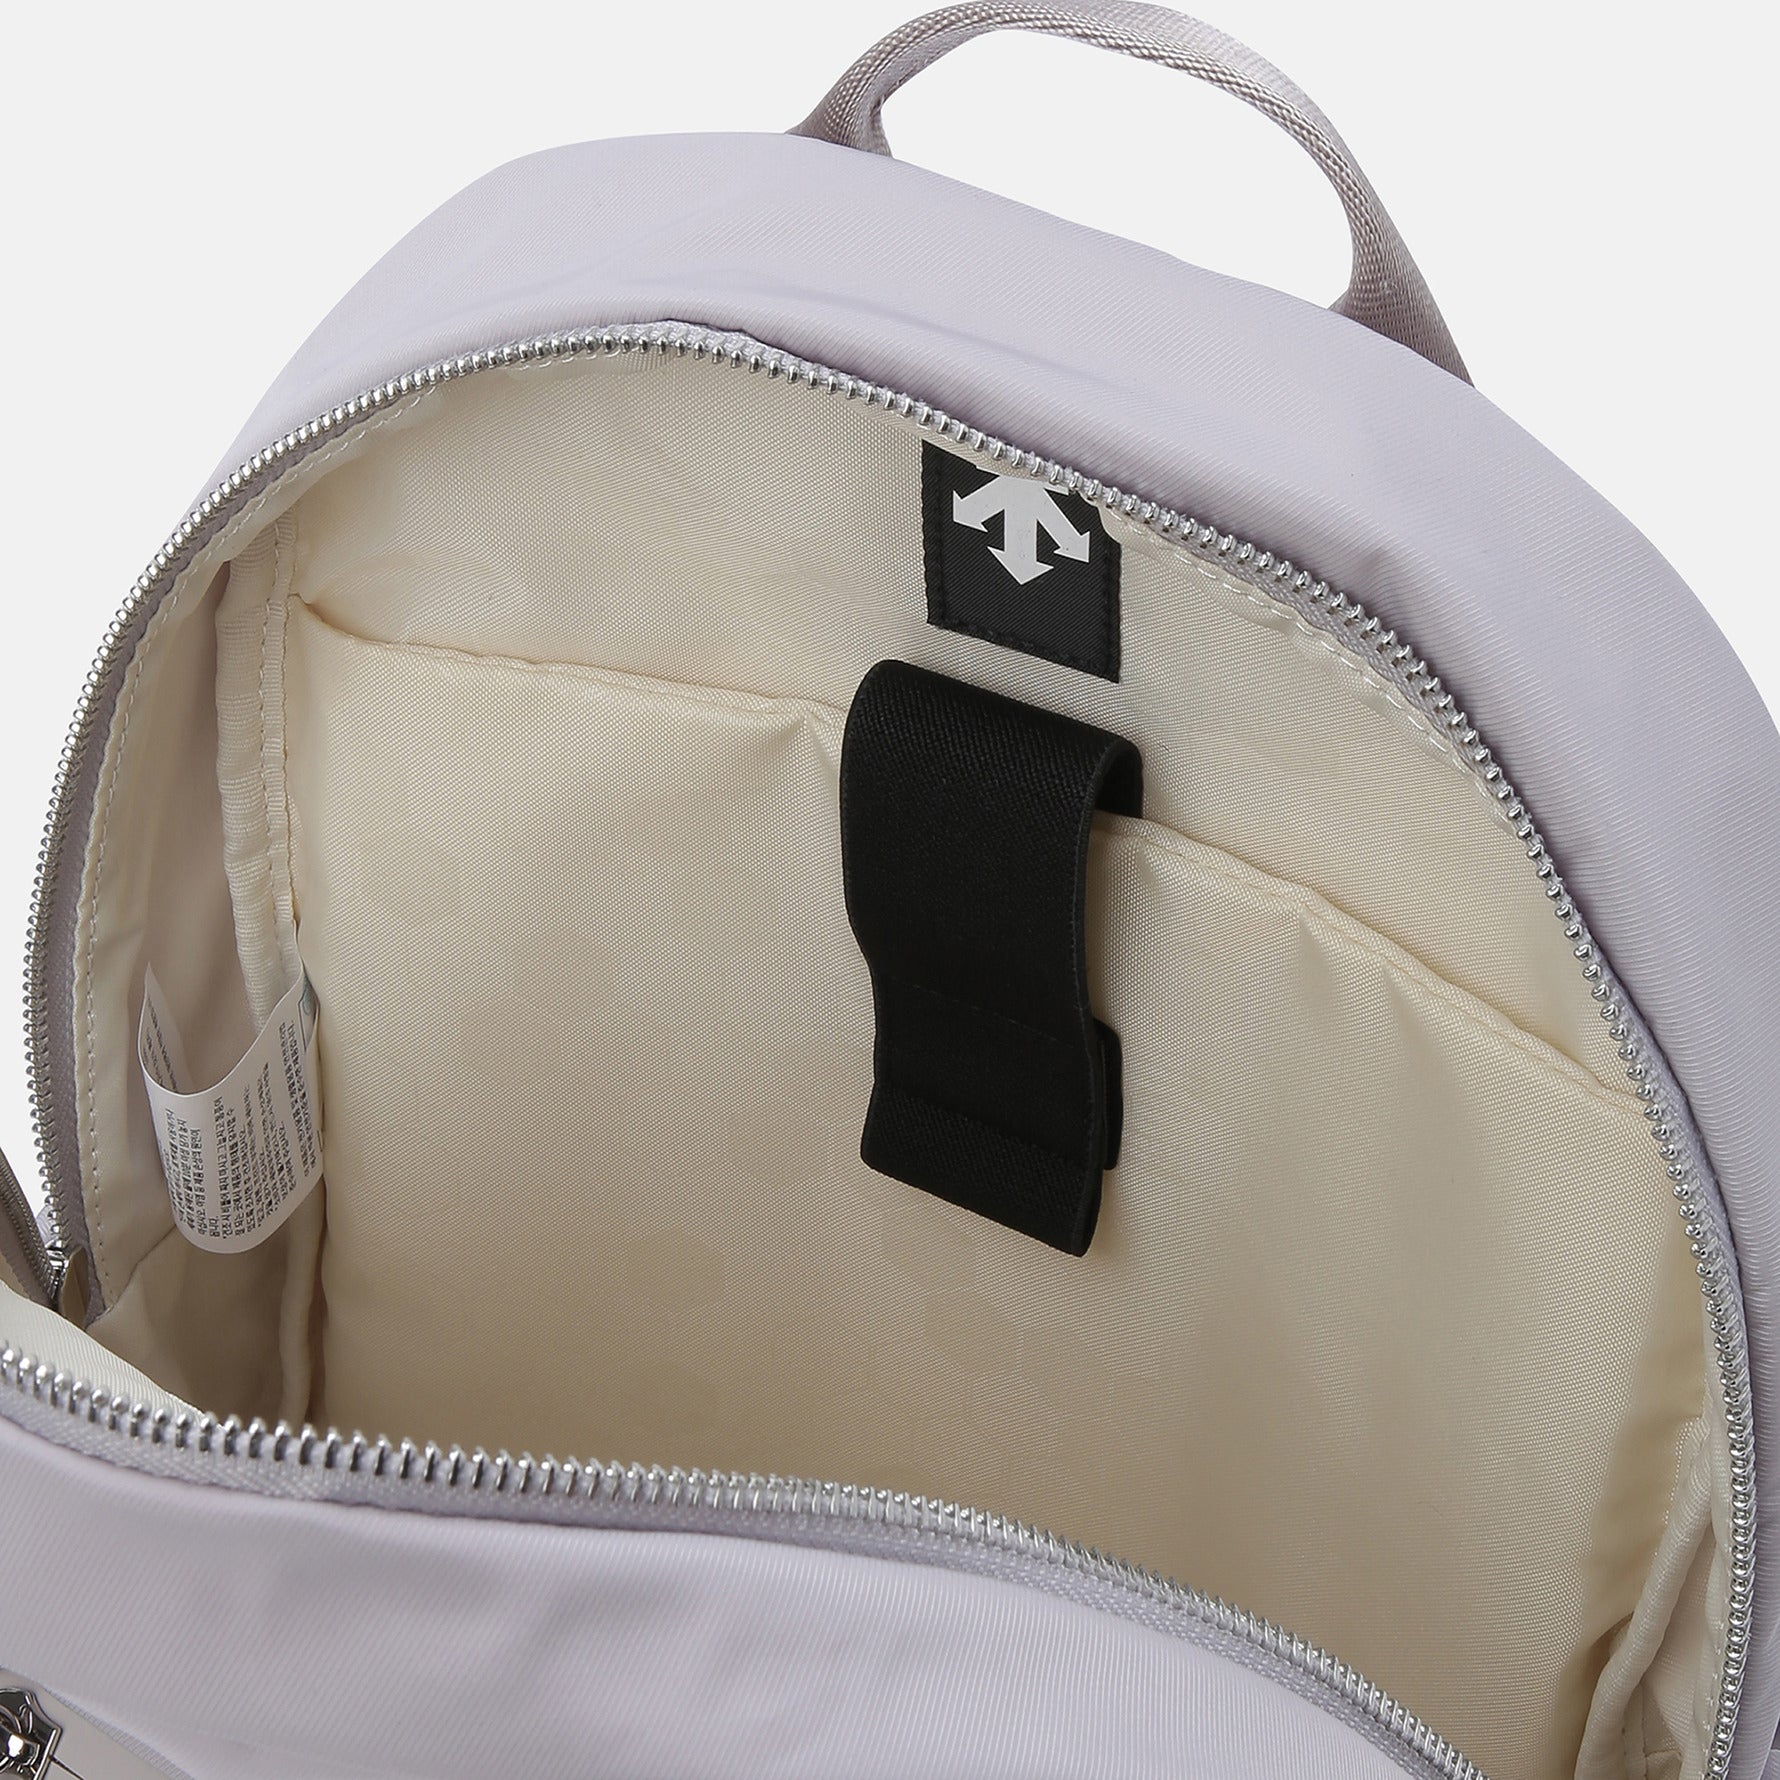 WOMENS DAILY BACK PACK 女性 後背包